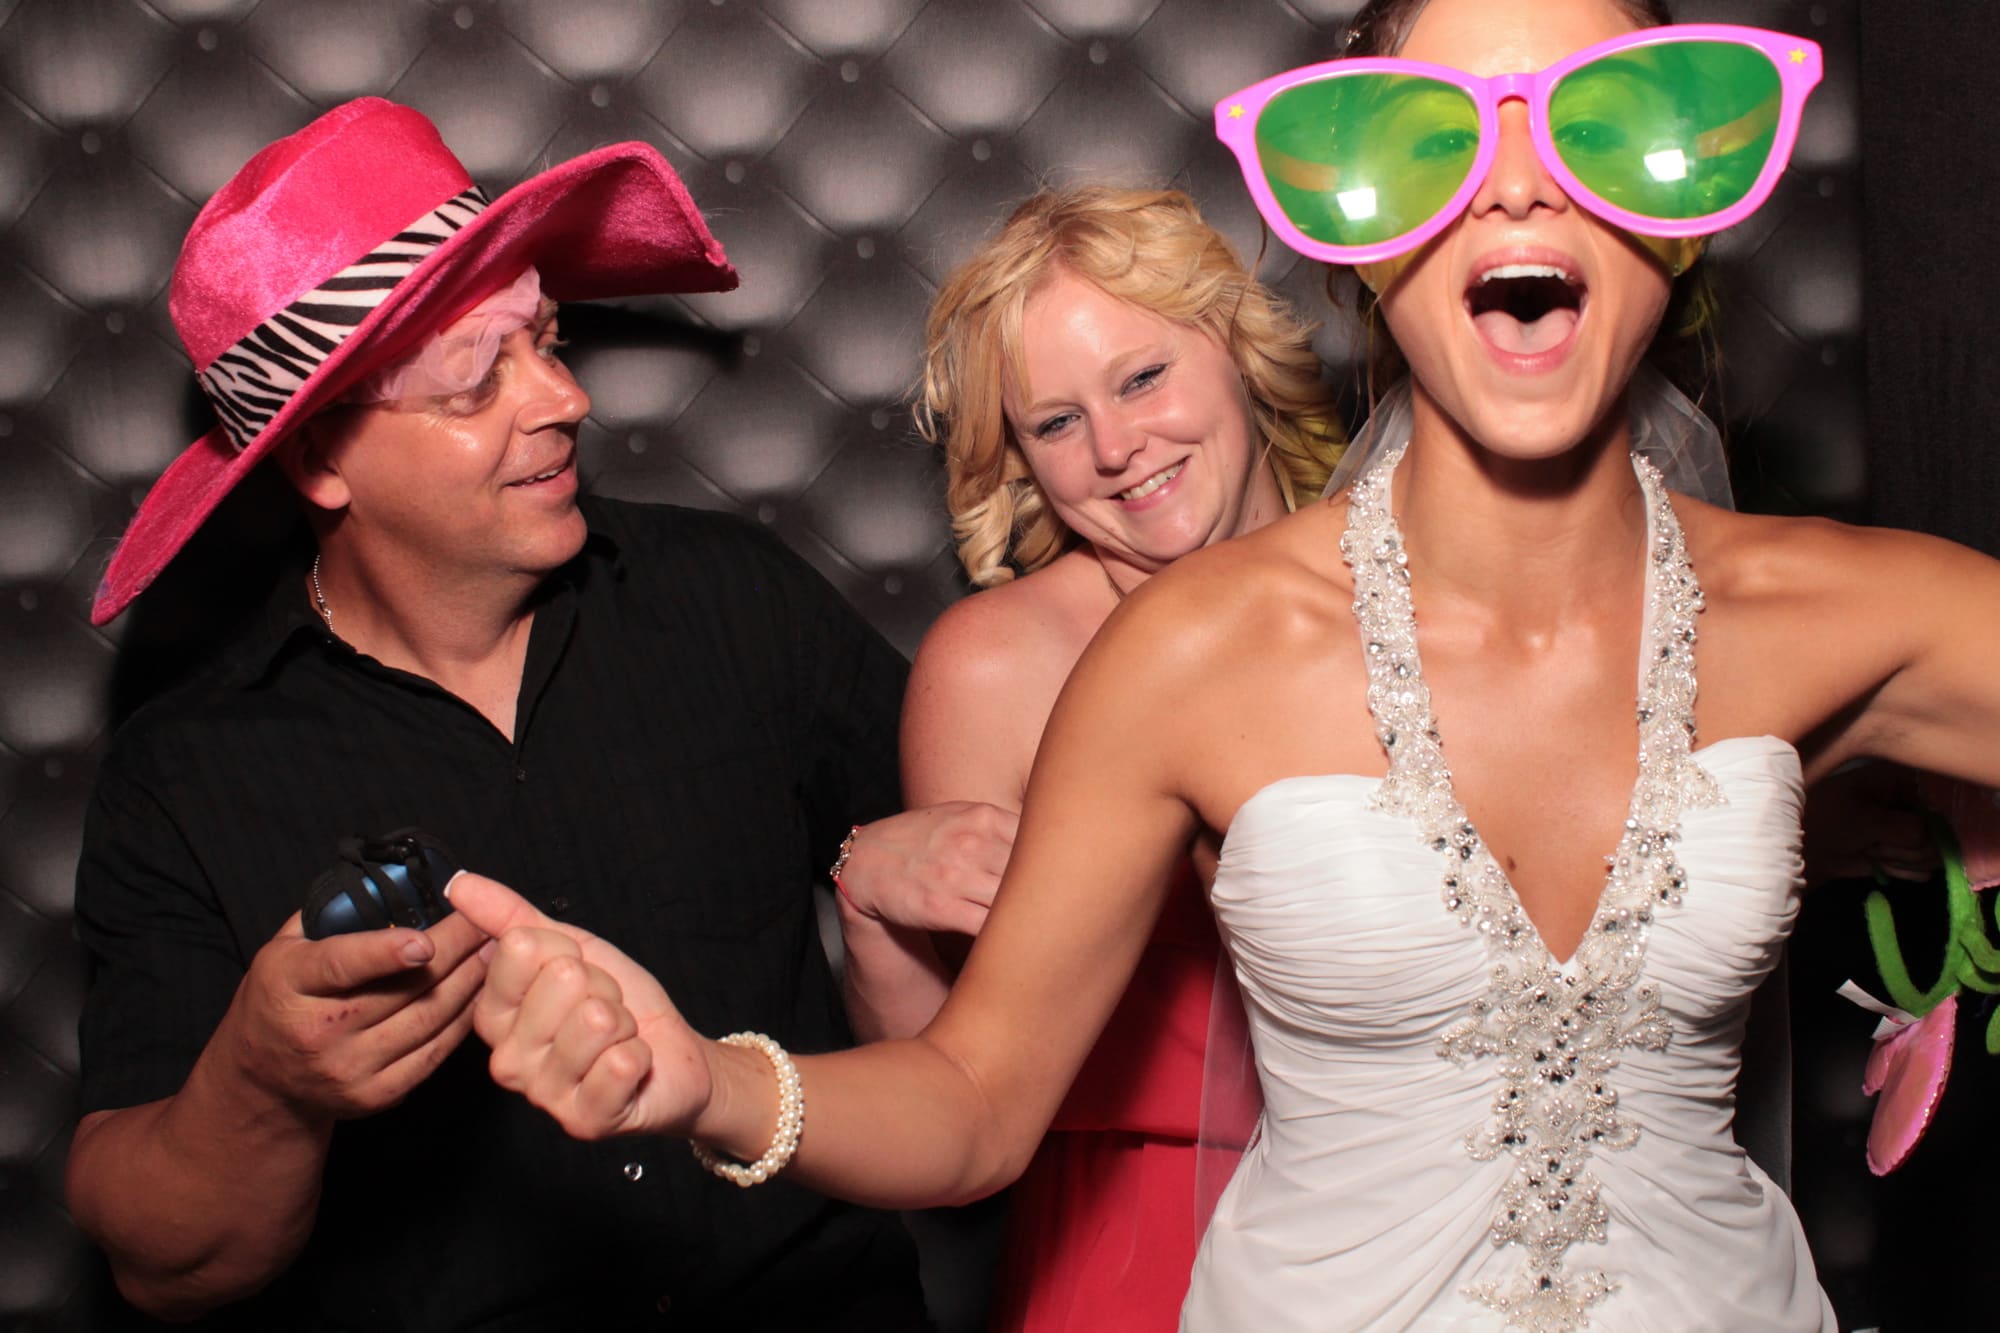 Austin-Wedding-Photo Booth Rental-El Paso-No. 1-Best-Memories-LGBT-Backgrounds-Selections